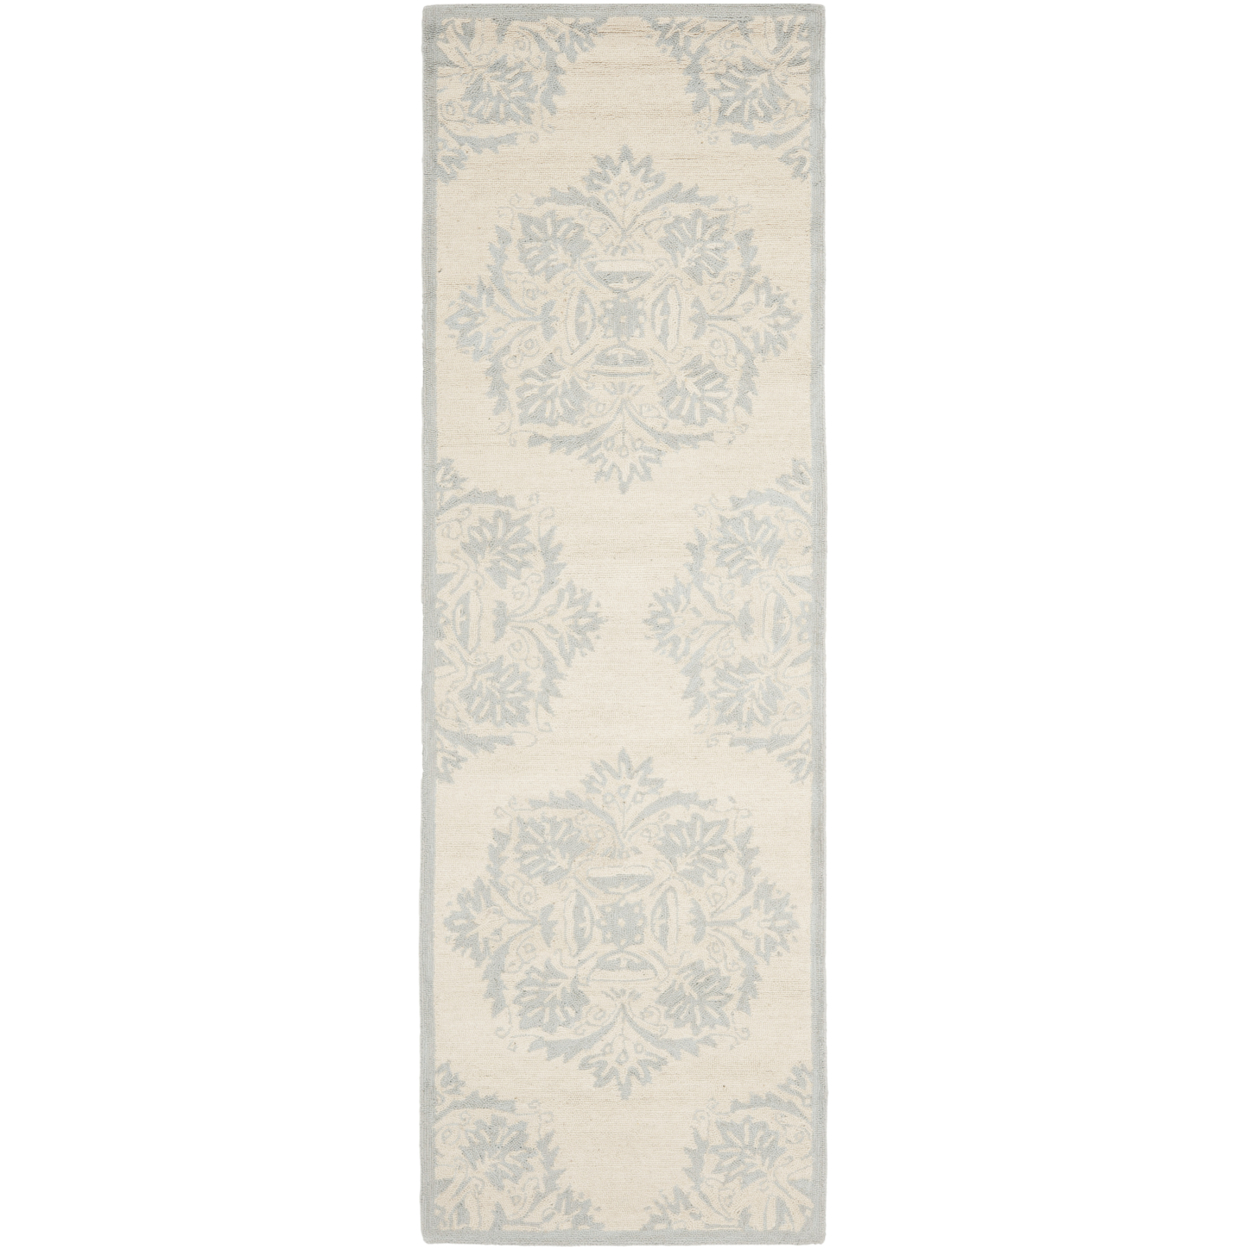 SAFAVIEH Chelsea HK359A Hand-hooked Ivory / Blue Rug - 2' 6 X 10'